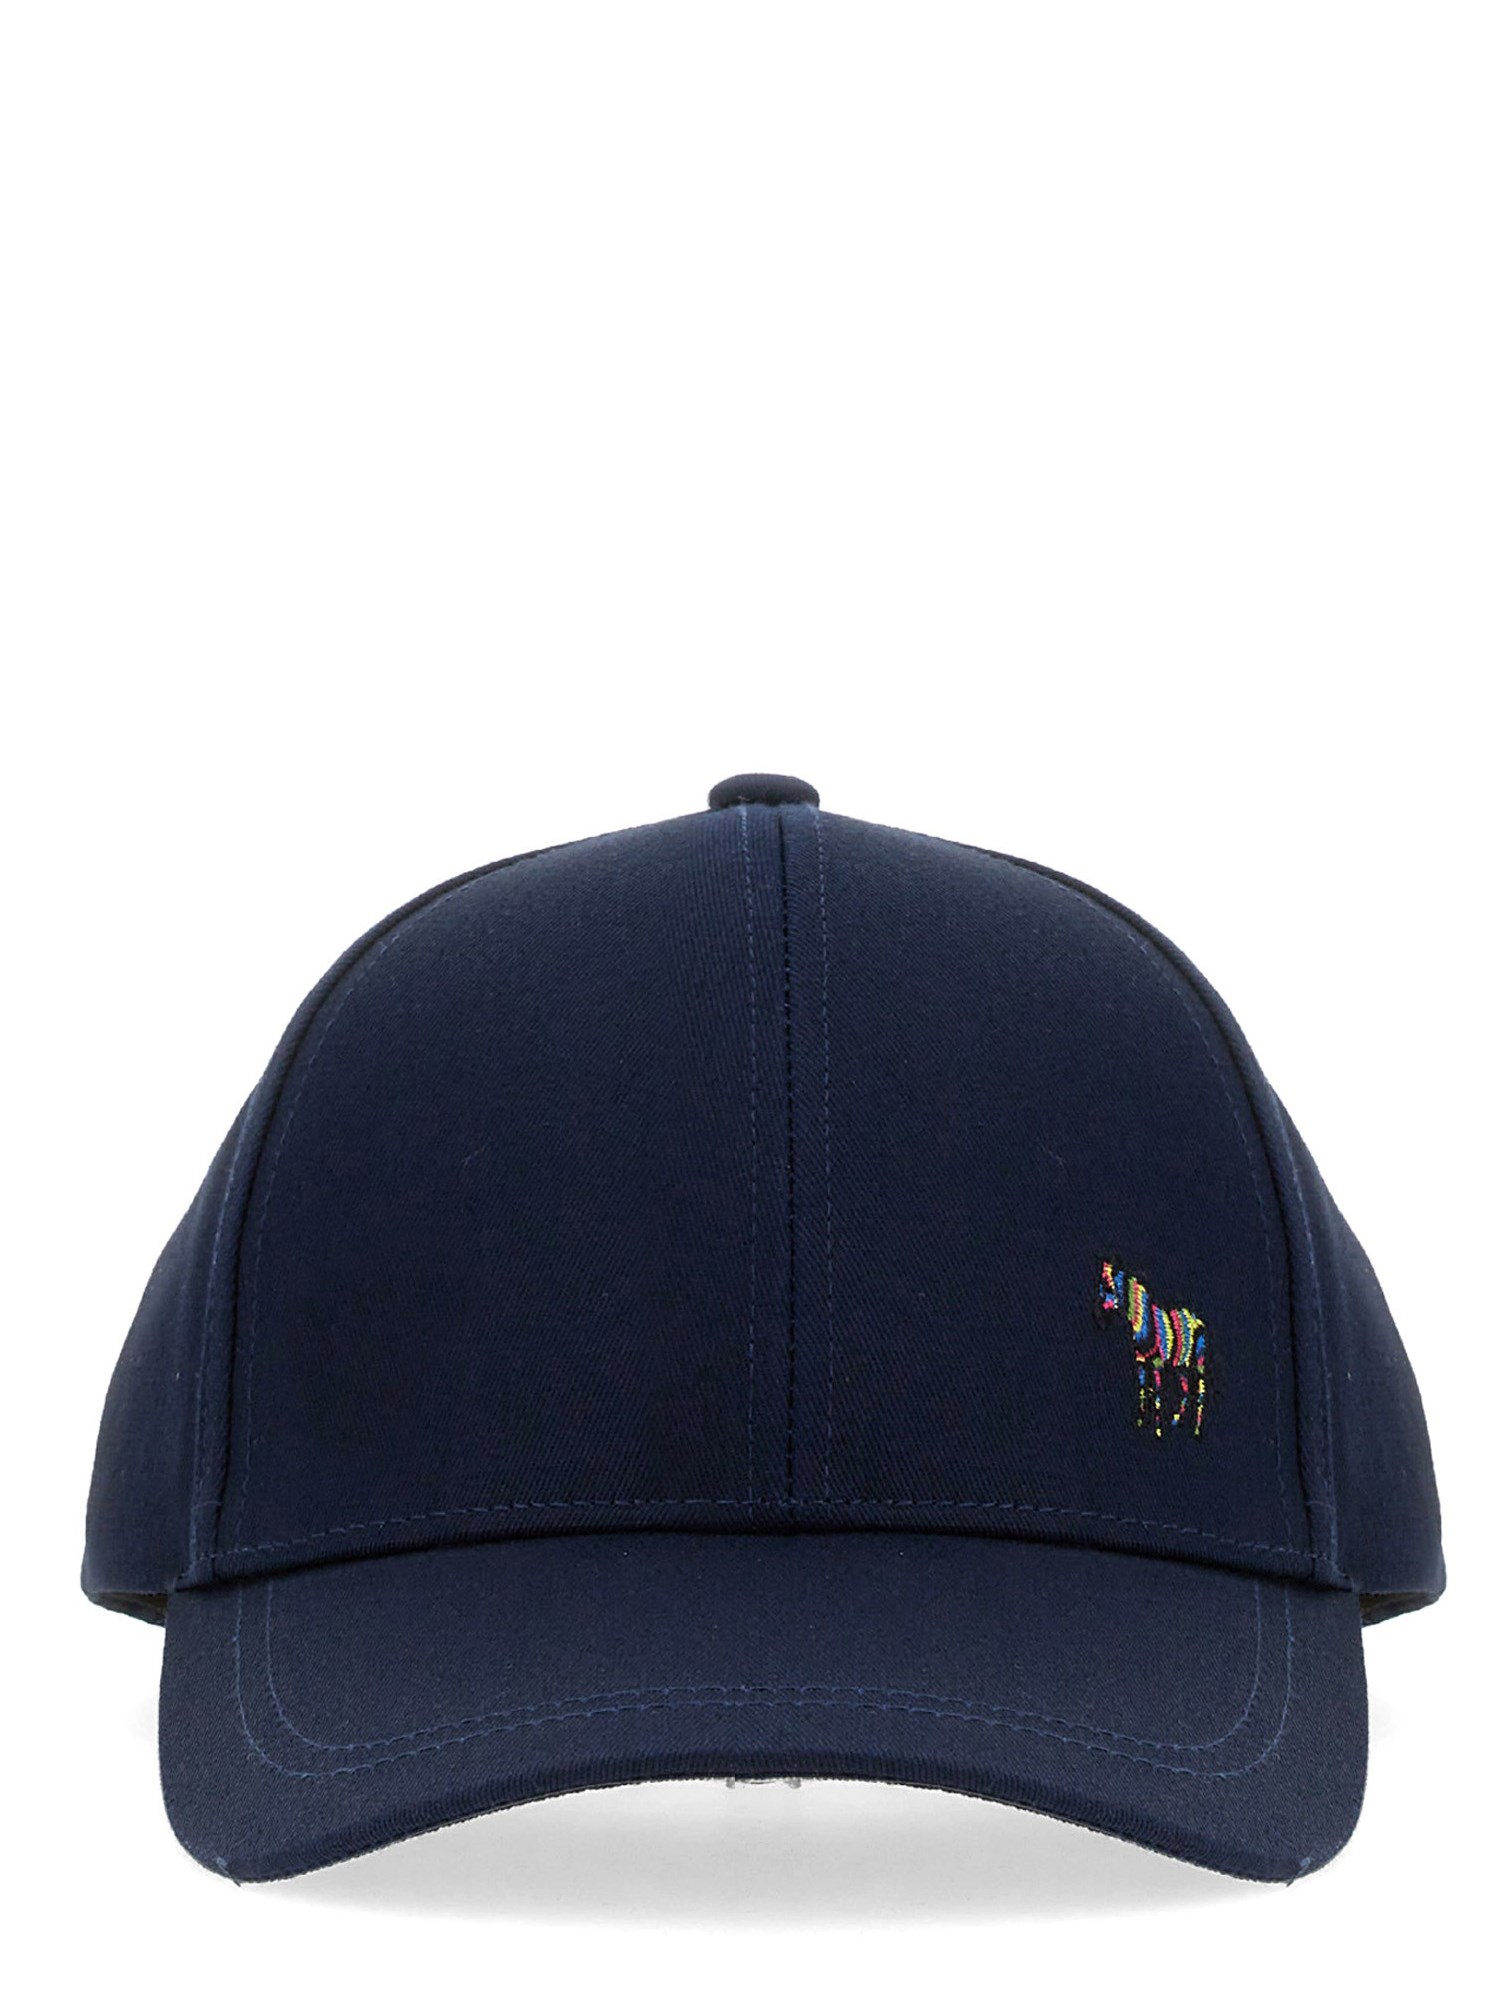 ps by paul smith baseball cap with 